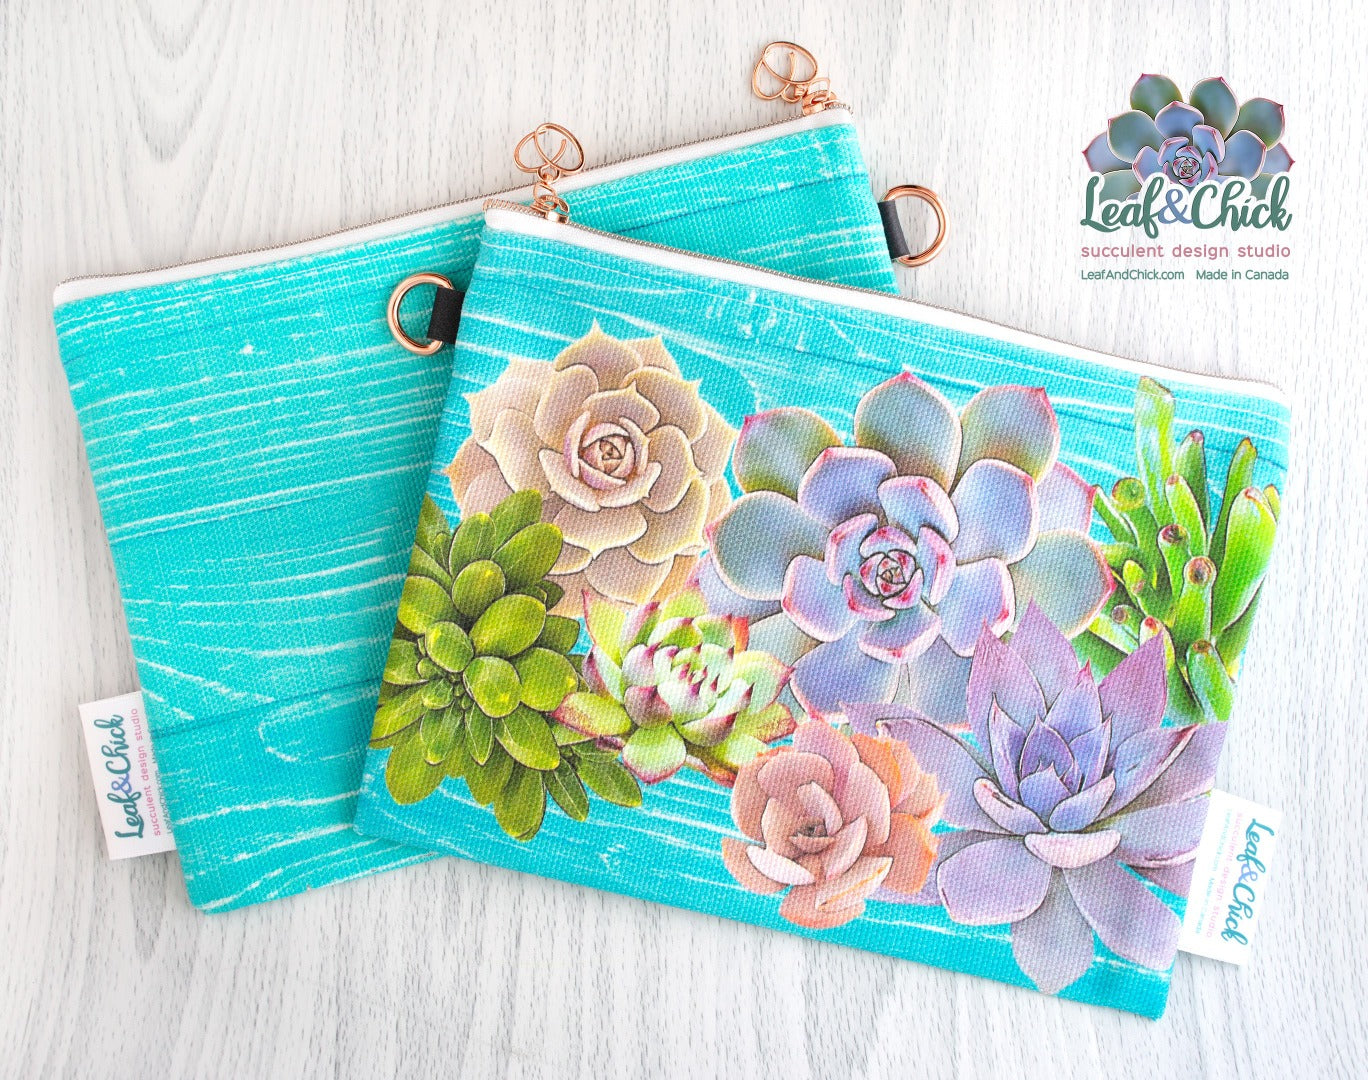 original fabric succulent designs zippered pouch from Leaf & Chick